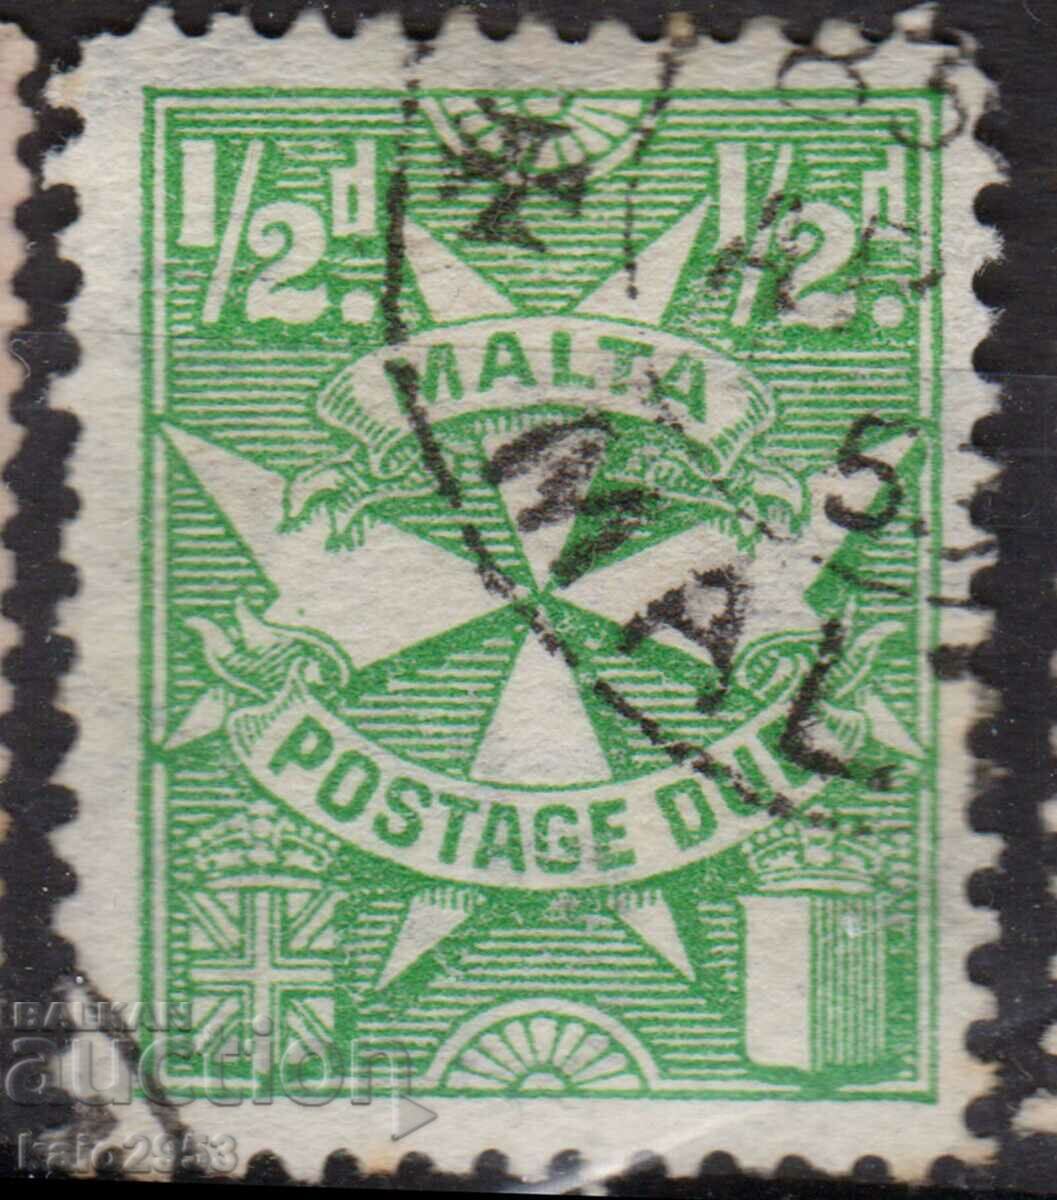 GB/Malta-1947-For additional payment-Maltese cross, stamp